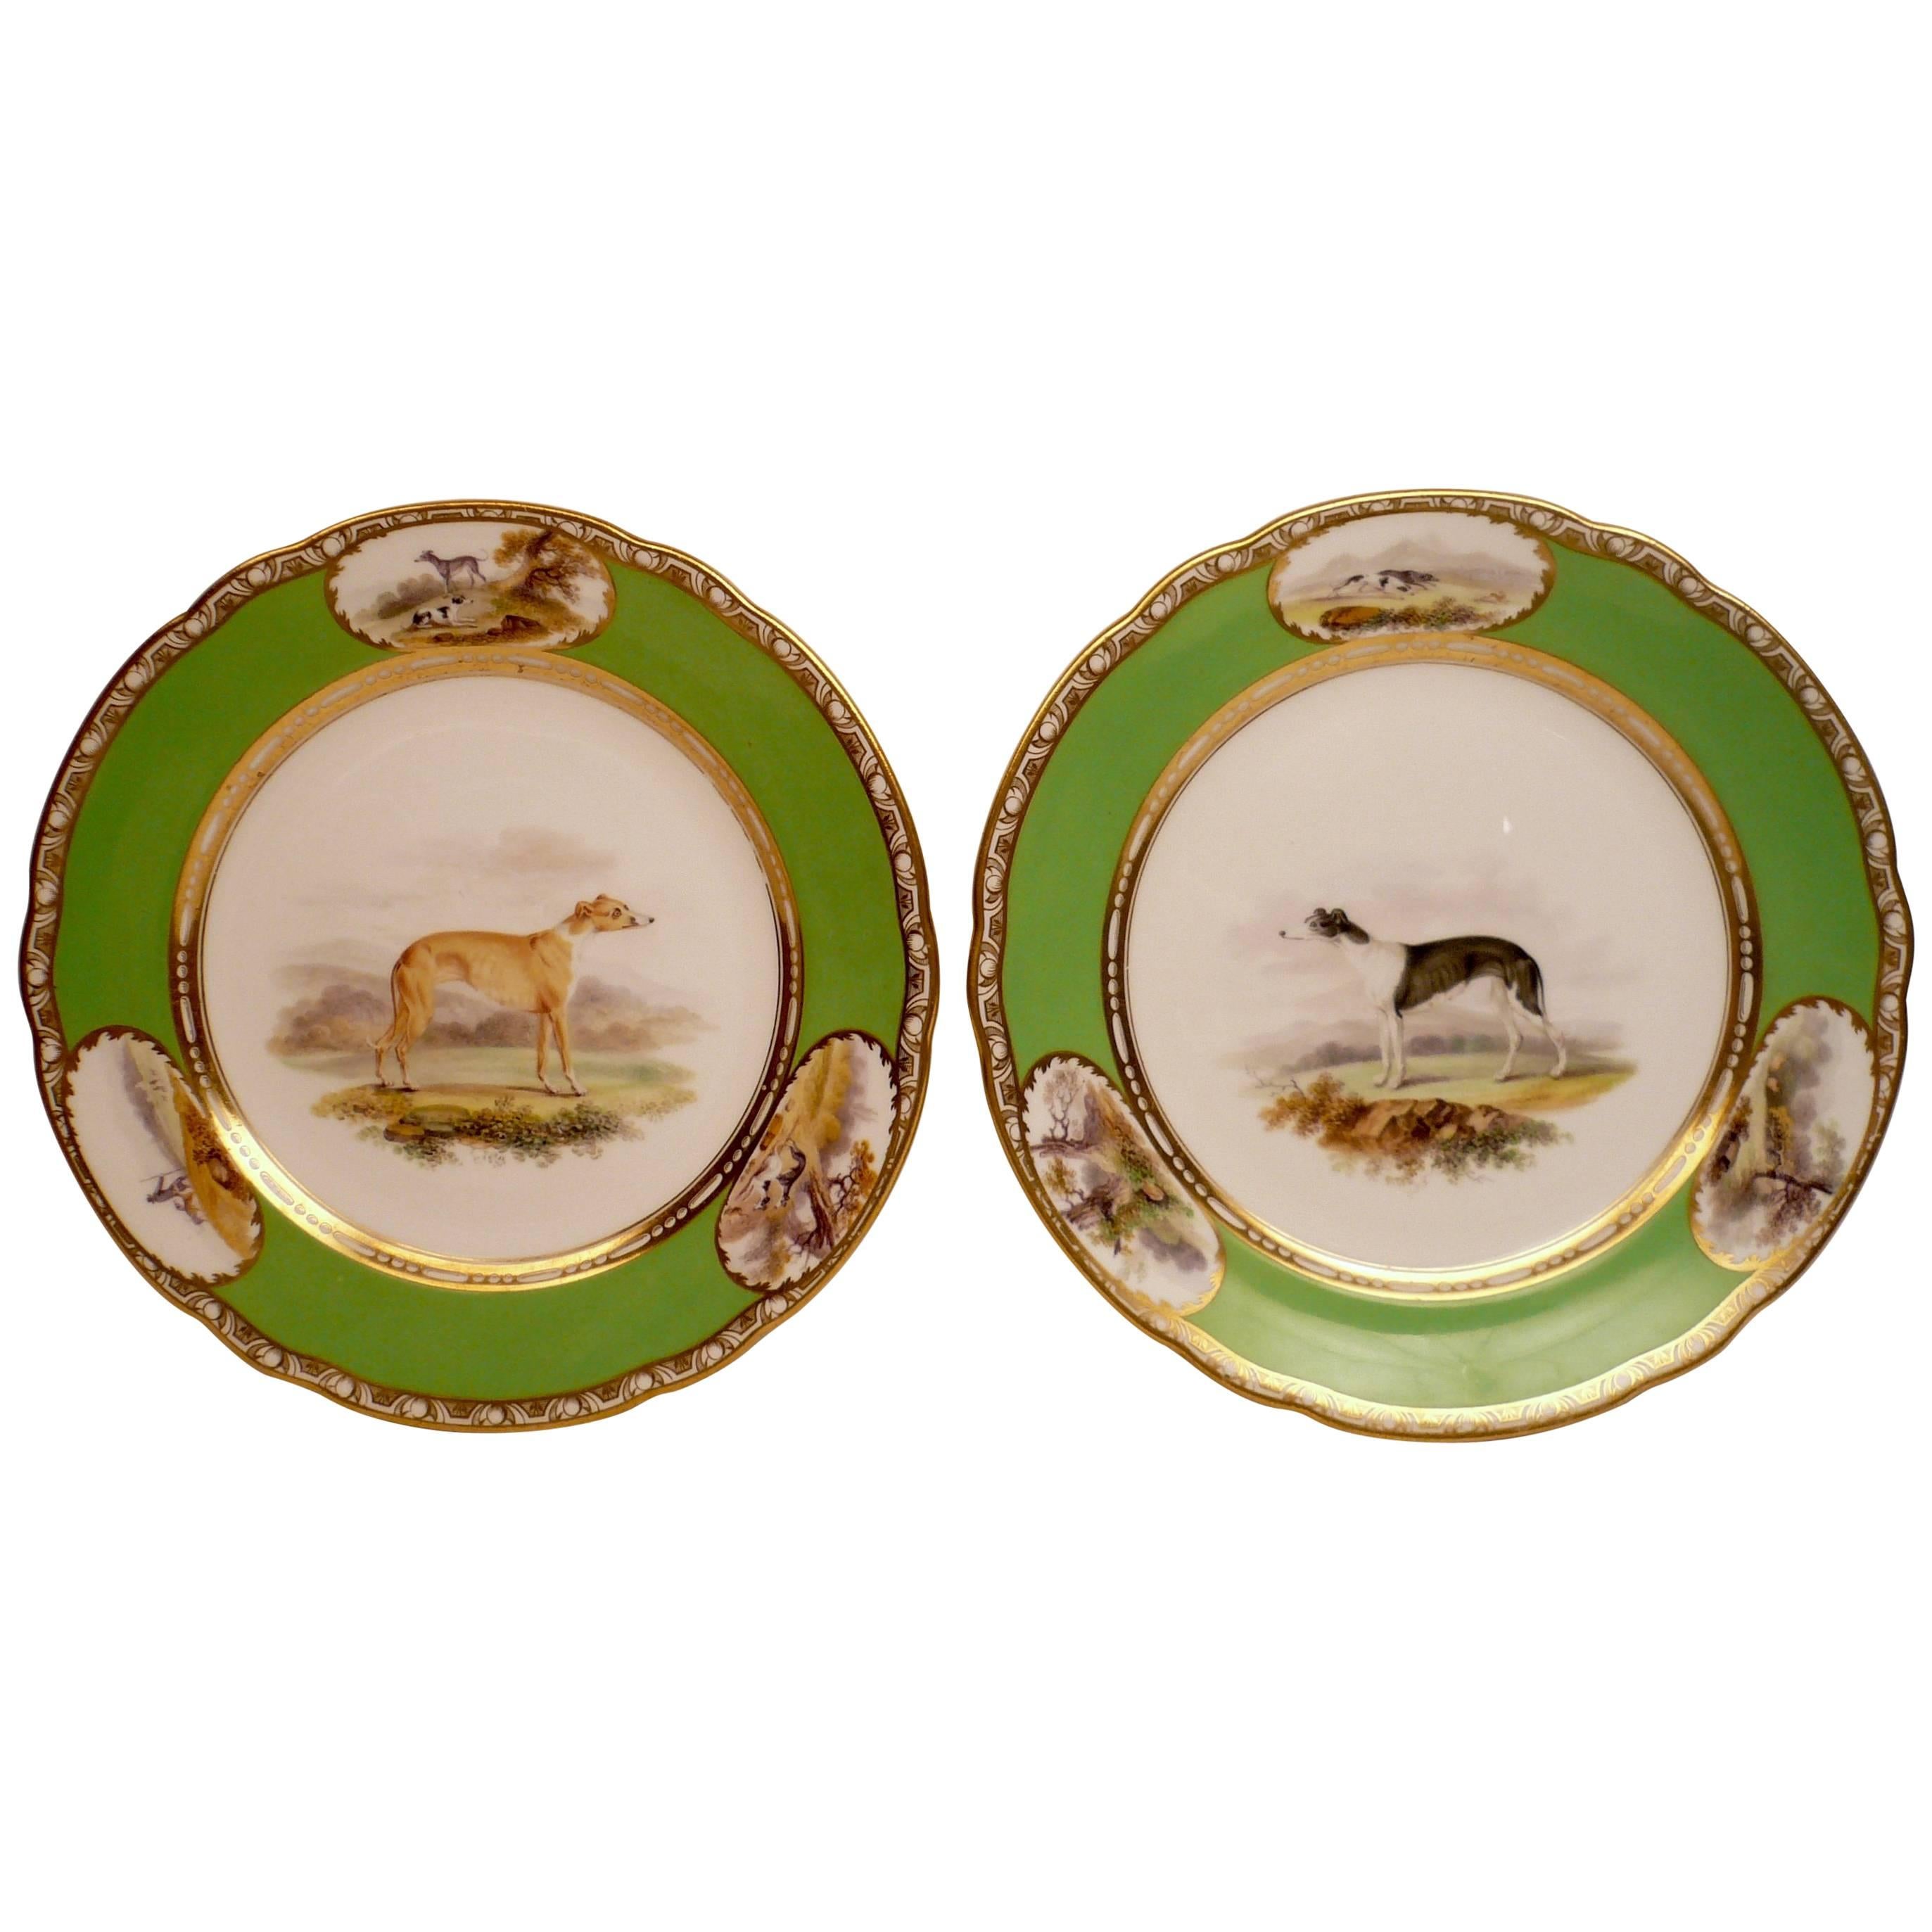 Pair of Antique English Porcelain Sporting Plates